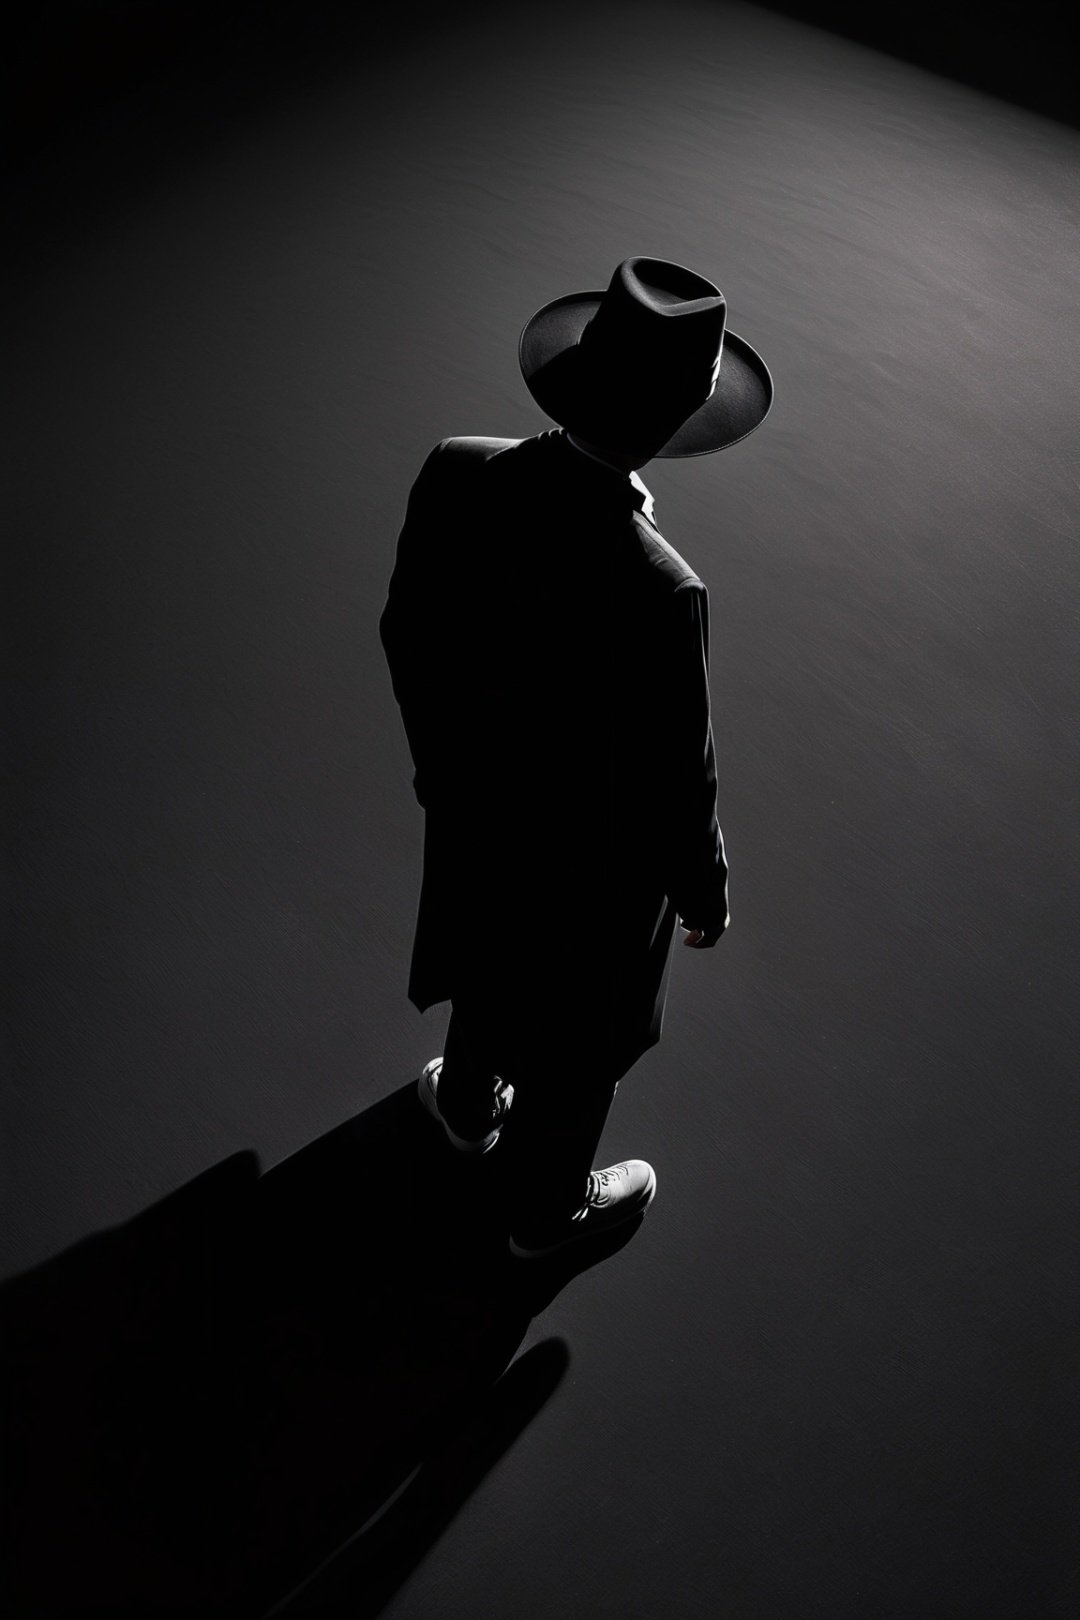 Prospect, Bird's-eye view, Human figure, A pure black background, Alone, Walk in a pure  black space, Shadow, Wearing a hat, Can't see the face clea, Loneliness, Sense of atmosphere, Leave a lot of black space, modern art